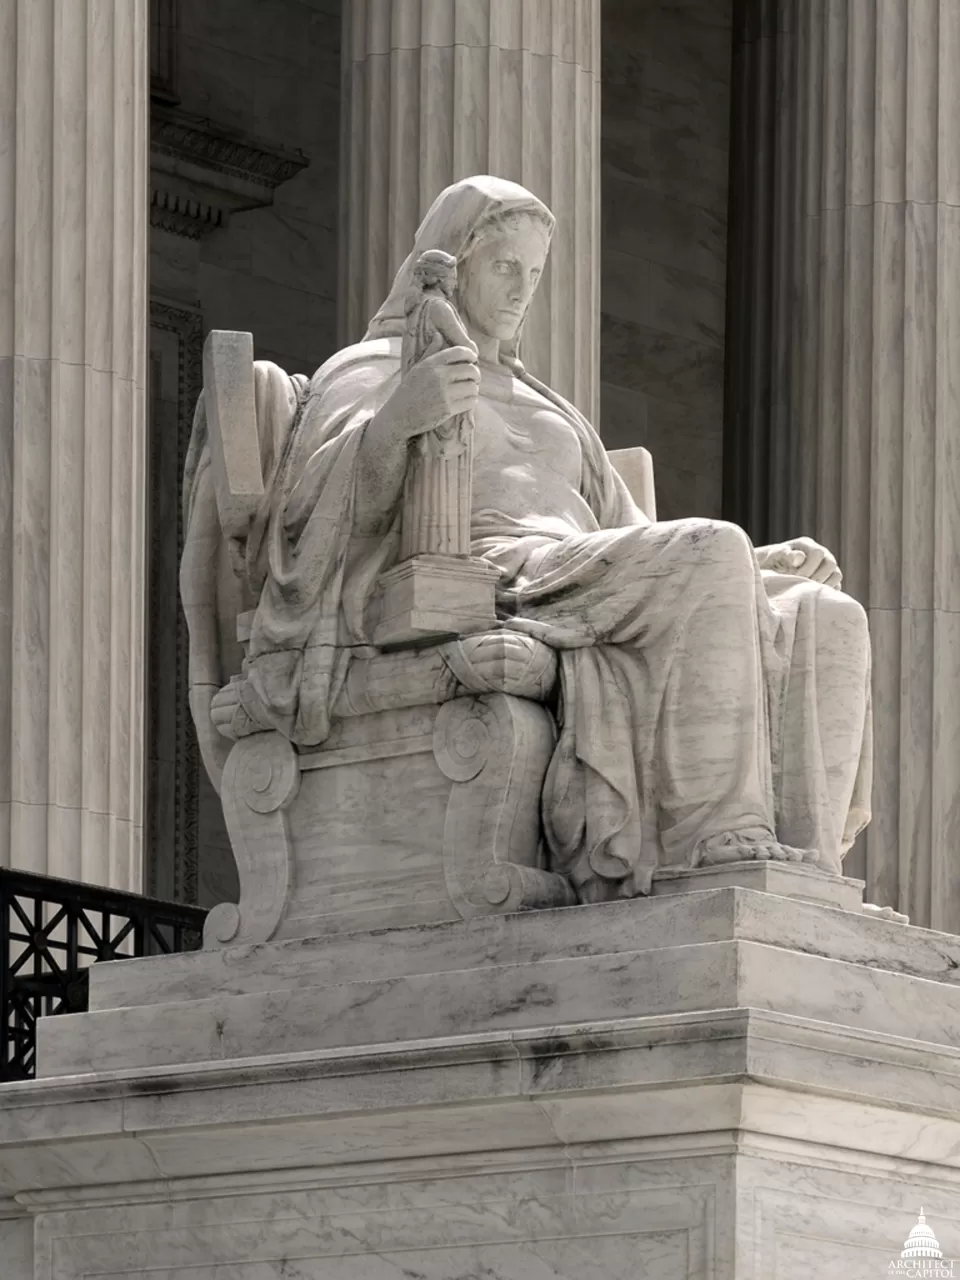 Statue of Contemplation of Justice by James Earle Fraser on the U.S. Supreme Court Building's main steps.